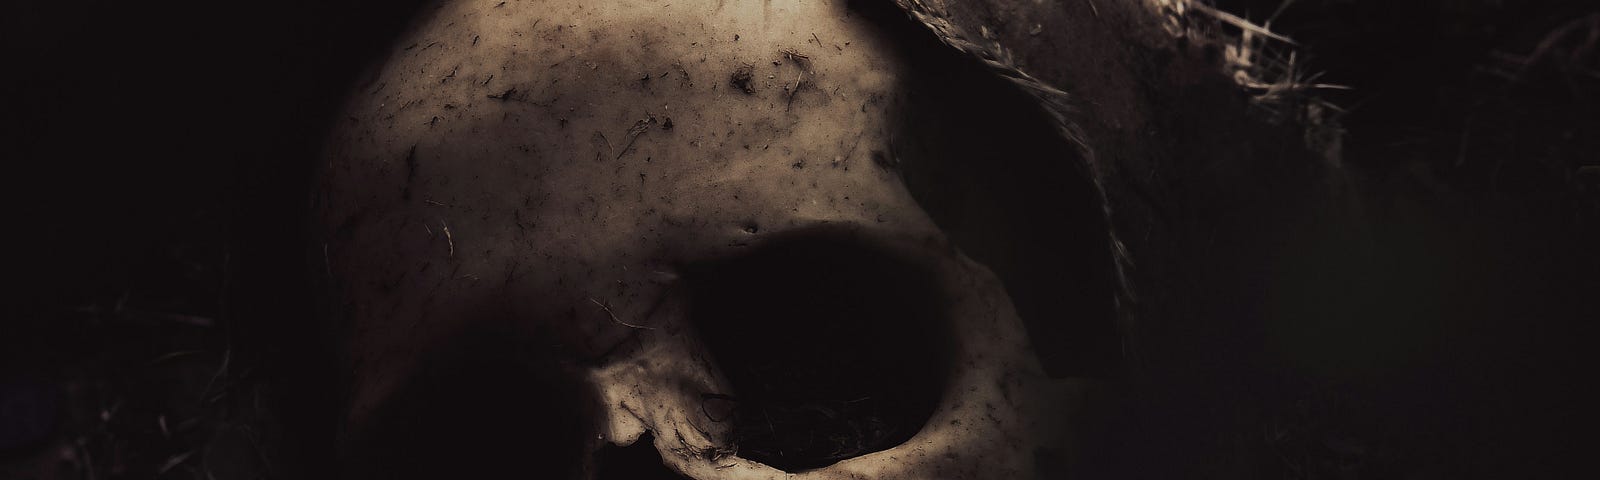 A human skull on a black background.